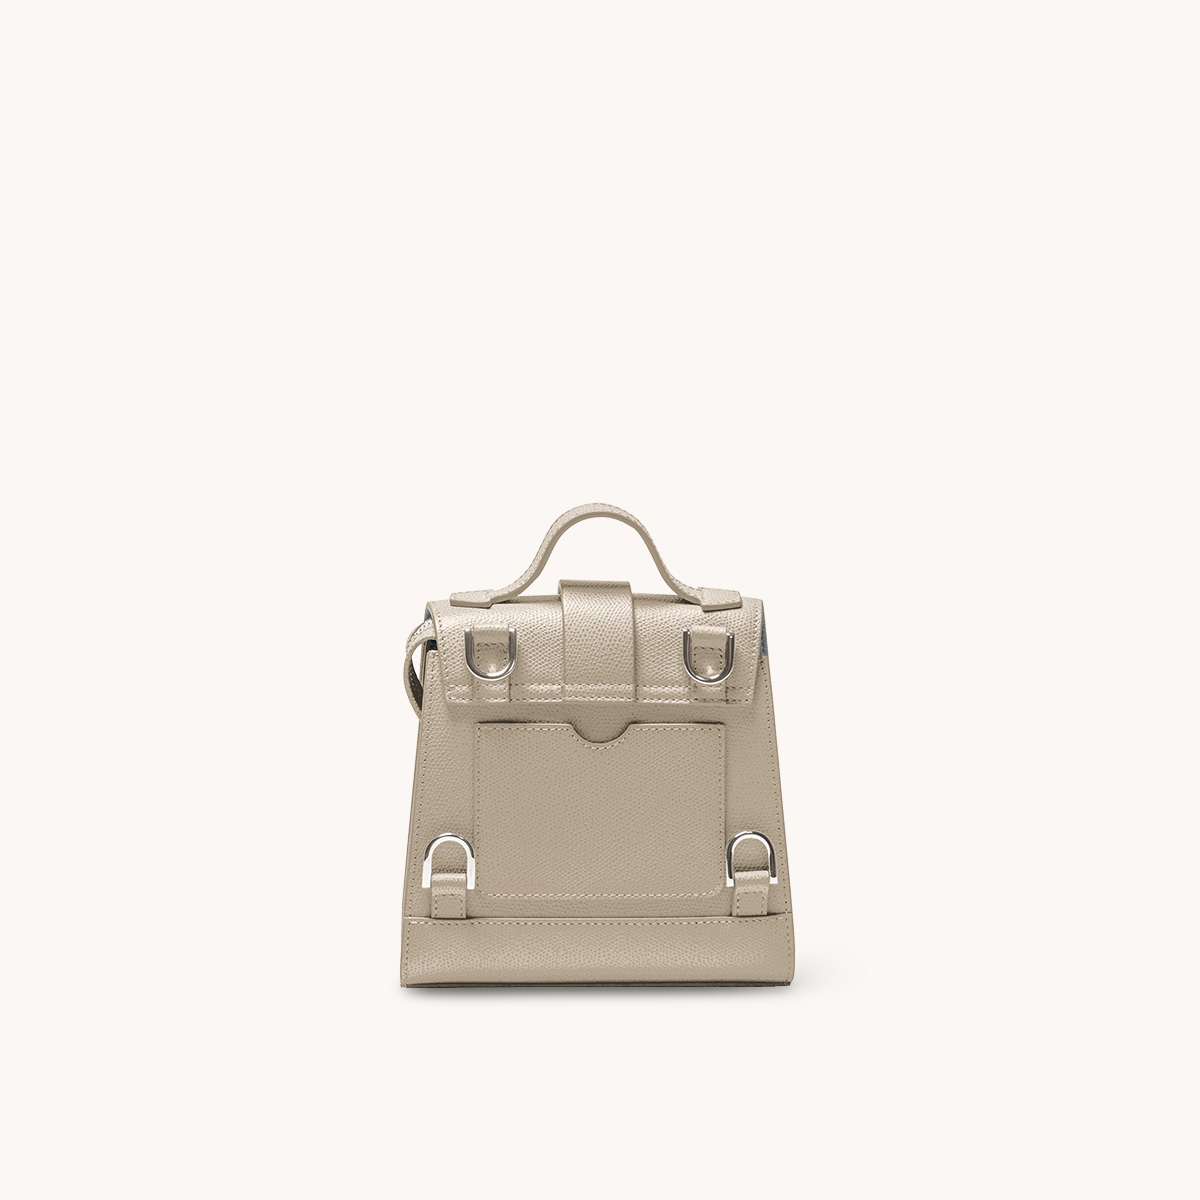 Mini Alunna Bag Pebbled Sand with Silver Hardware Back View Without Straps